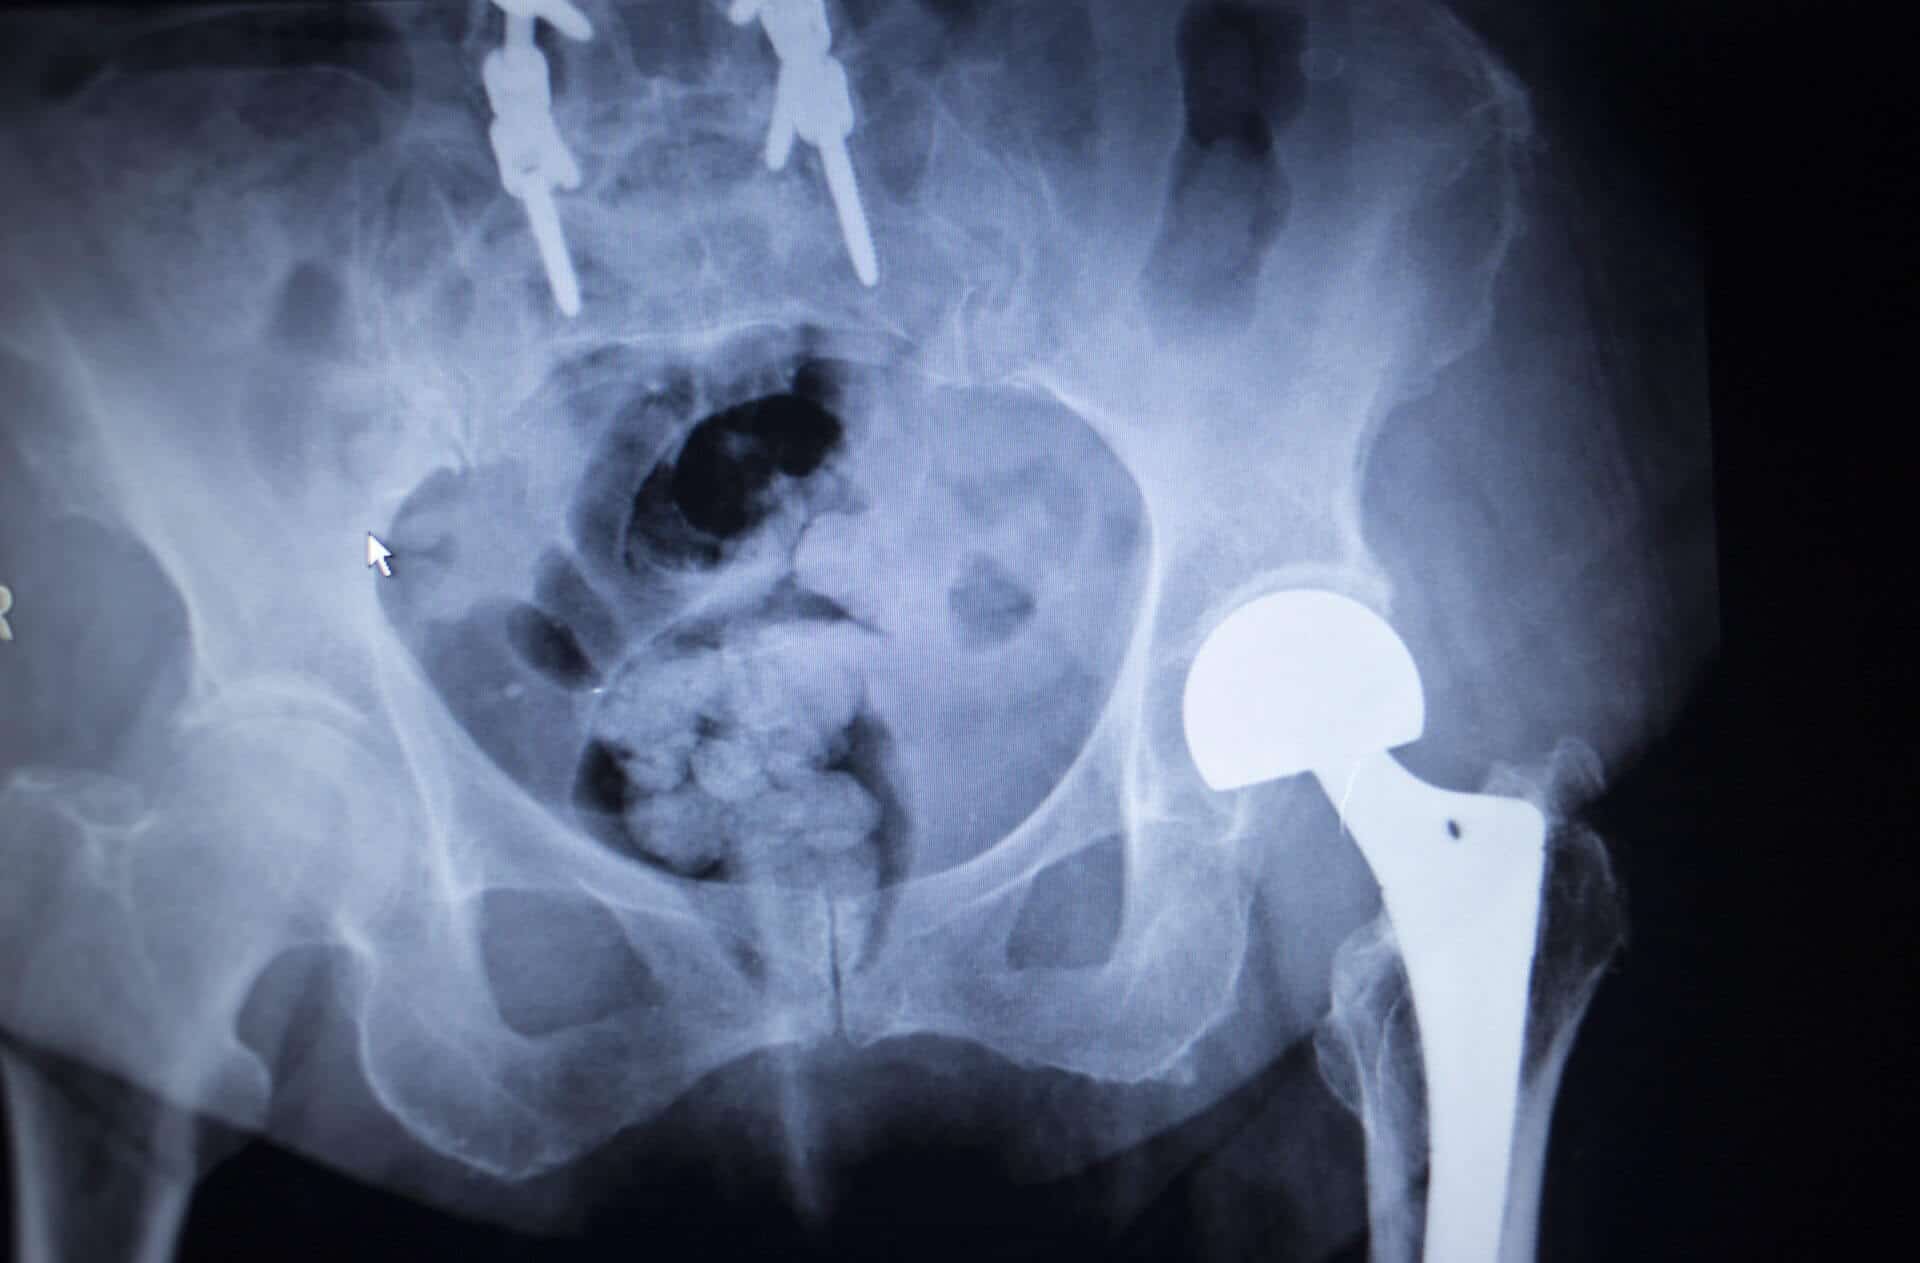 Stryker hip replacement lawsuit